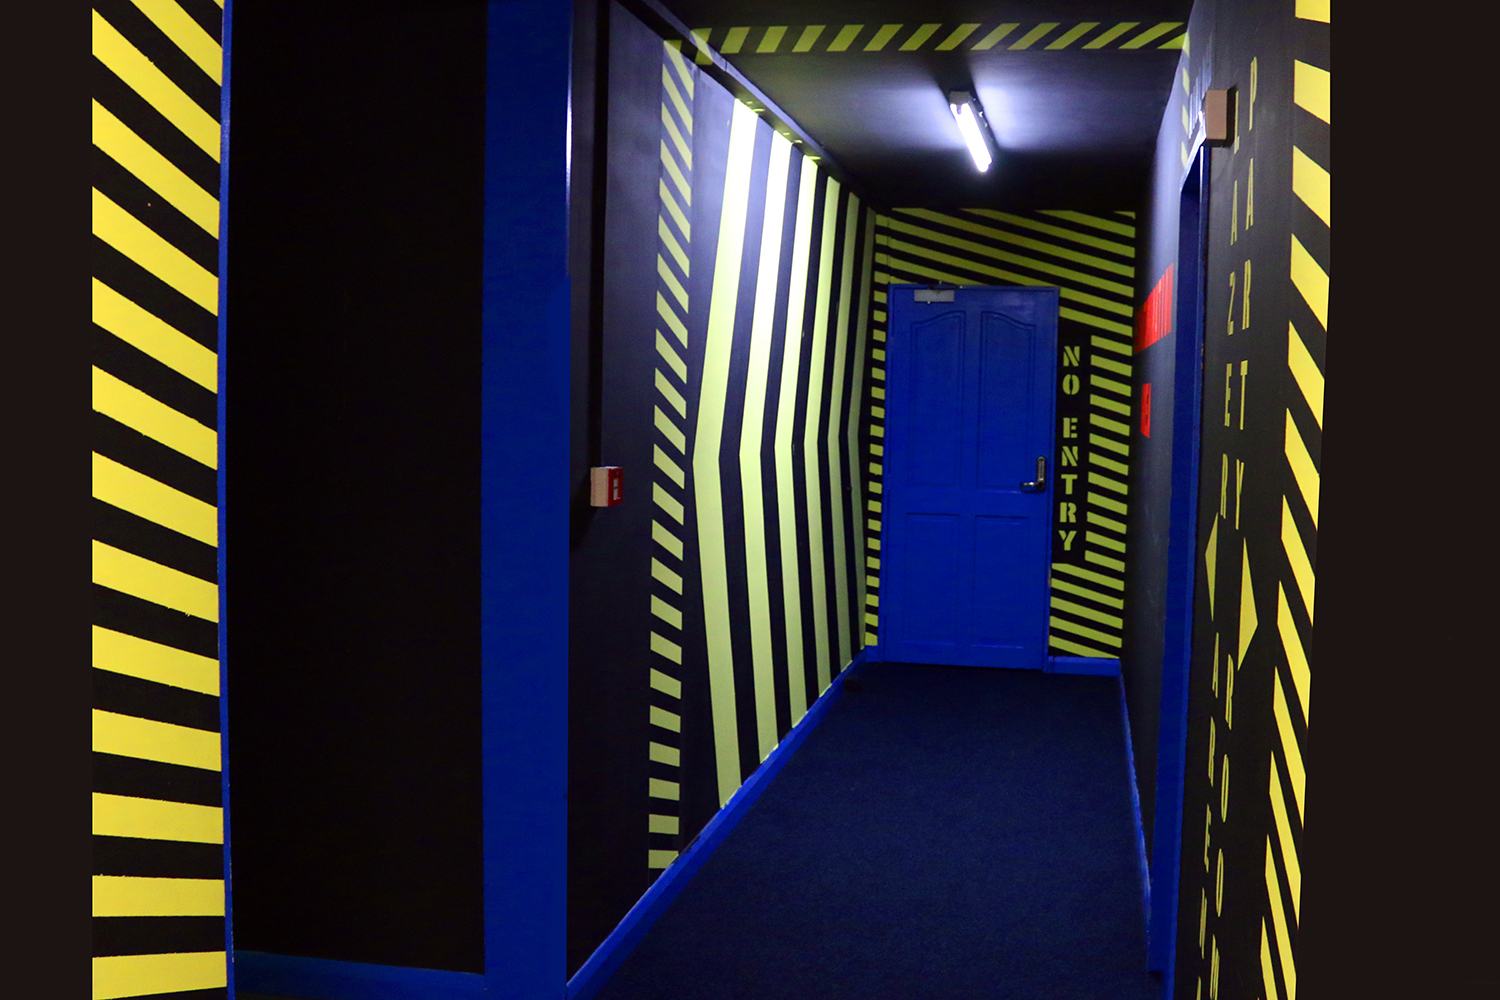 Book your Lazer Zone session at Selby Superbowl! - 2 games of action!